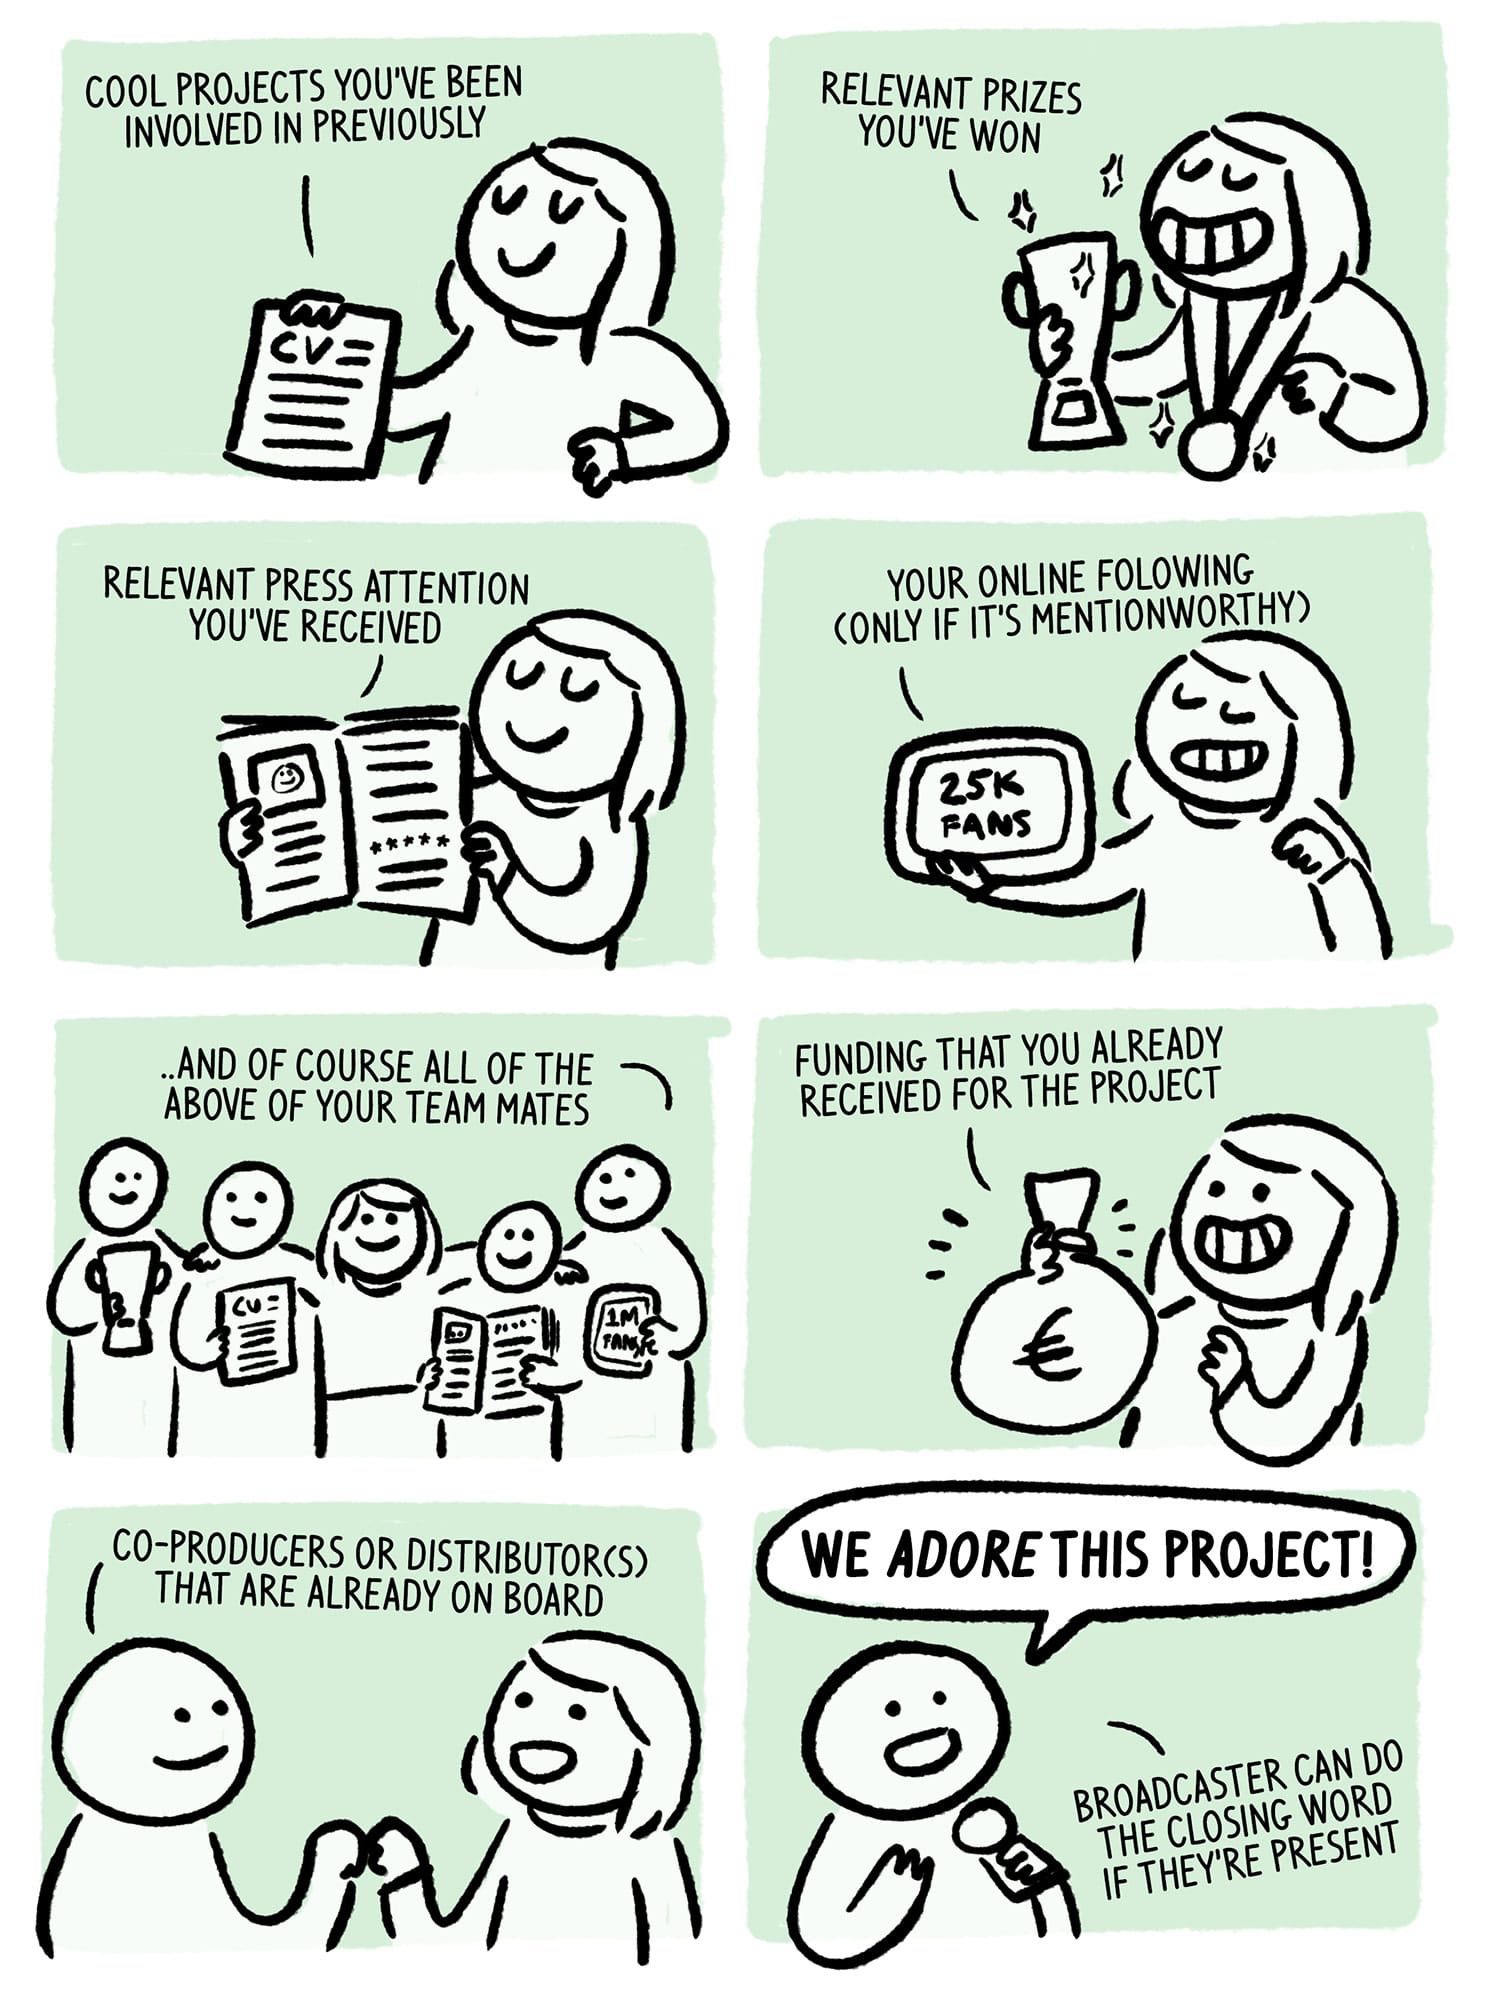 Tips on pitching an animated project.